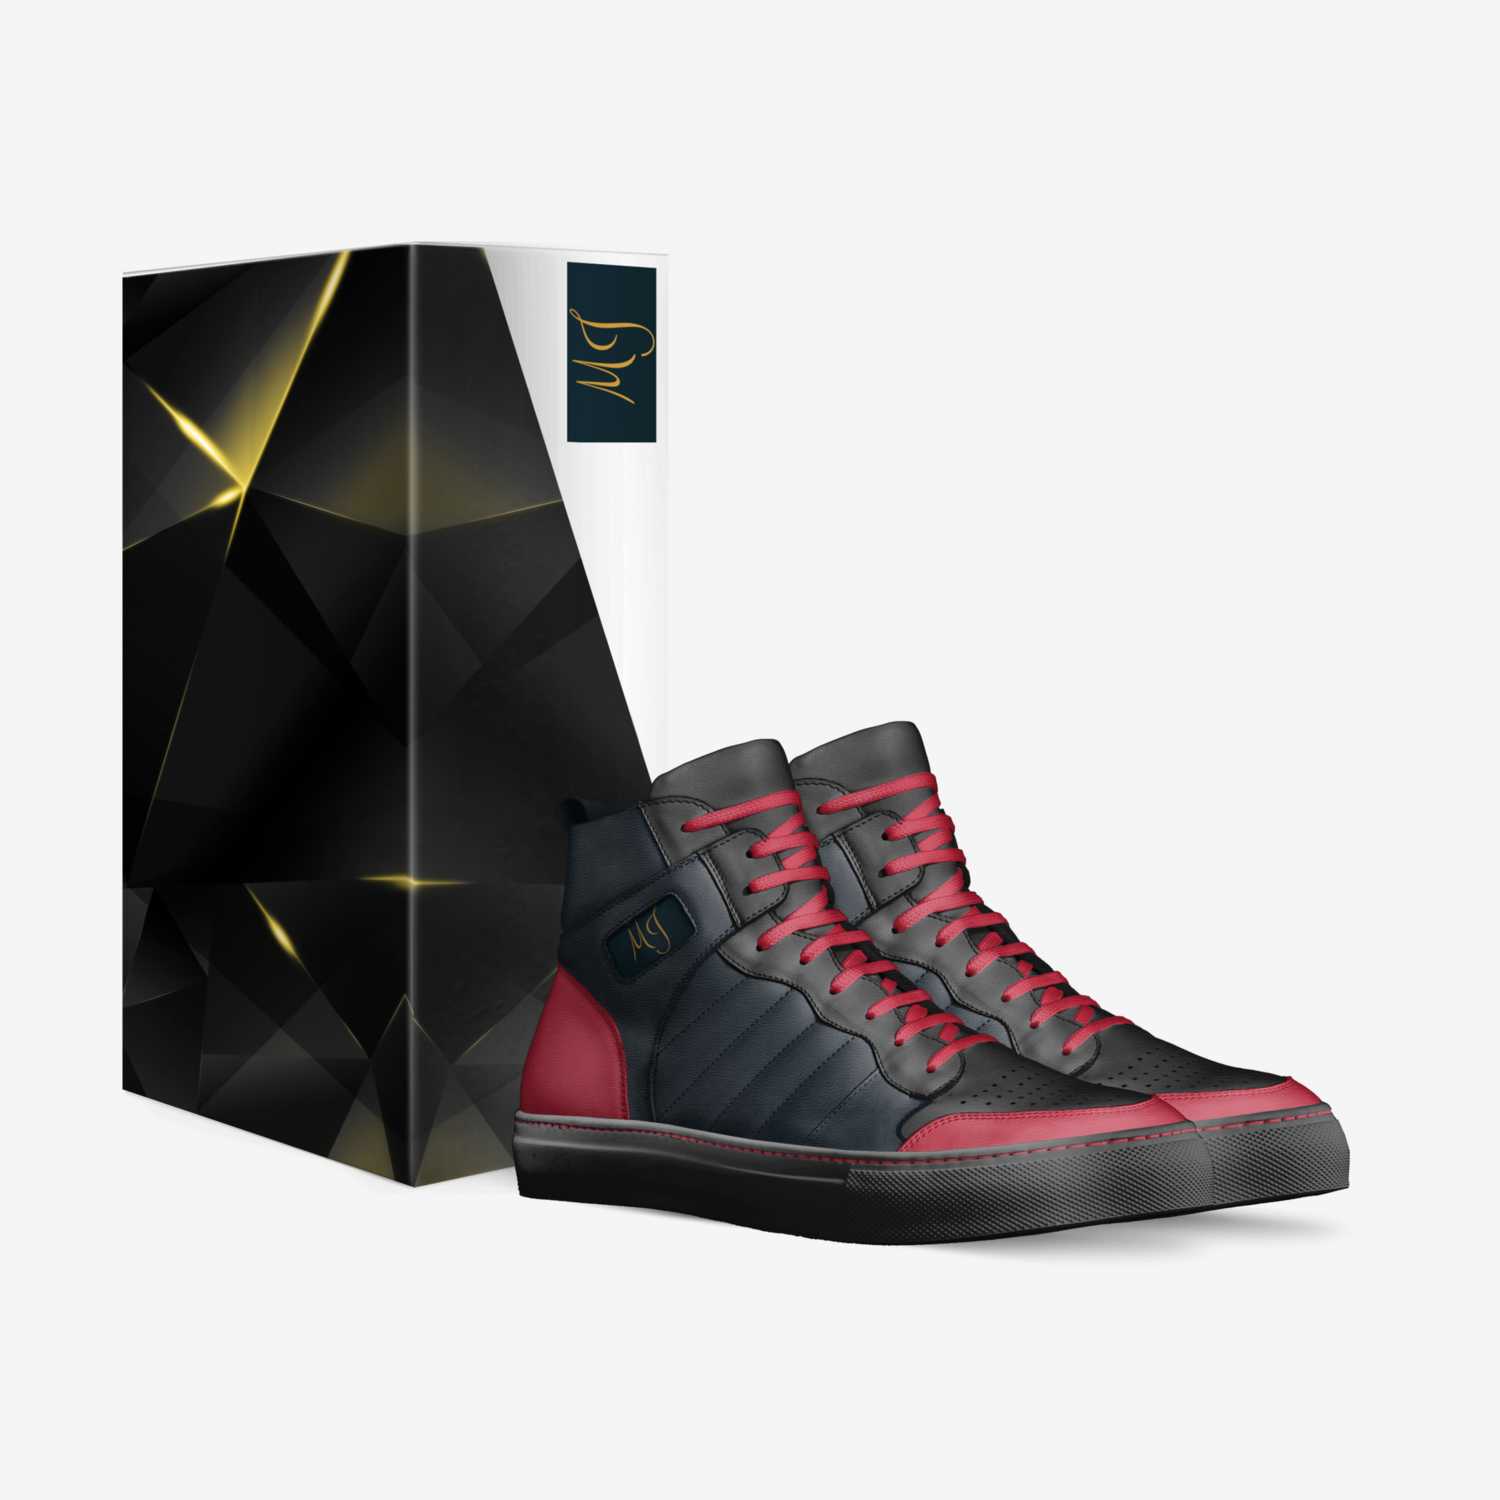 MJ 1 custom made in Italy shoes by Mahdi And Jack | Box view